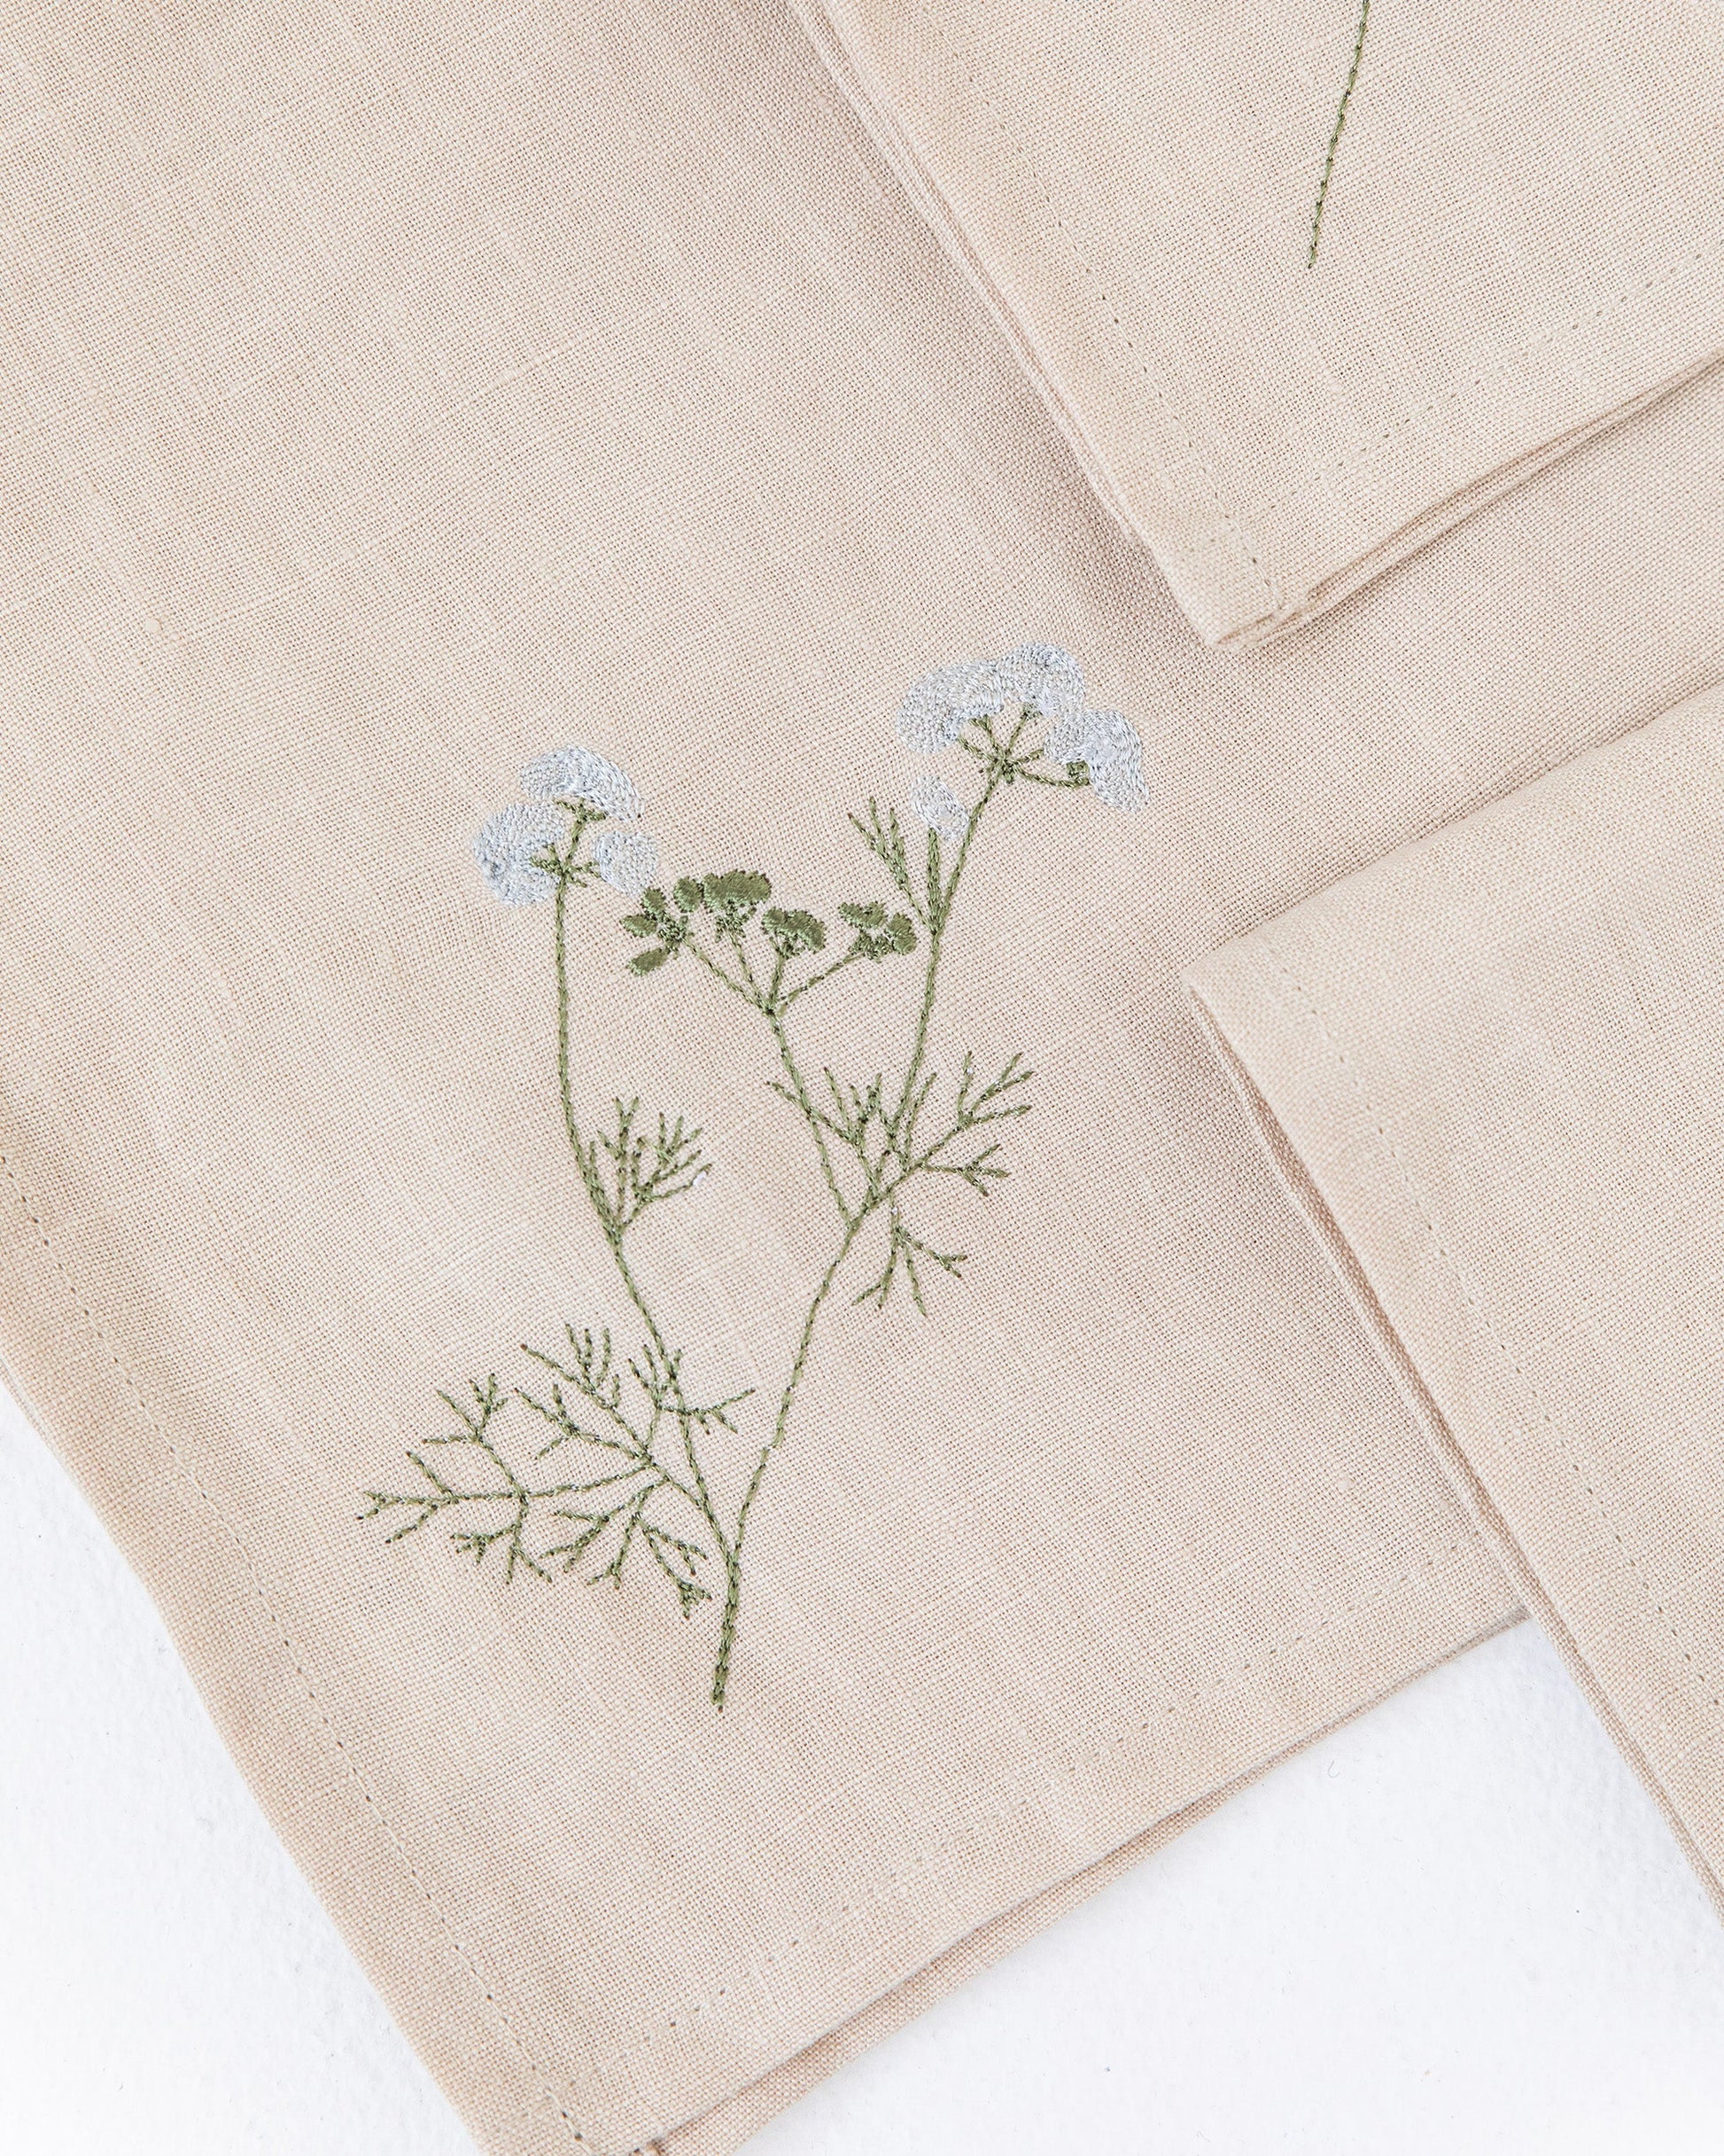 Wildflower embroidered napkin set of 4 - MagicLinen